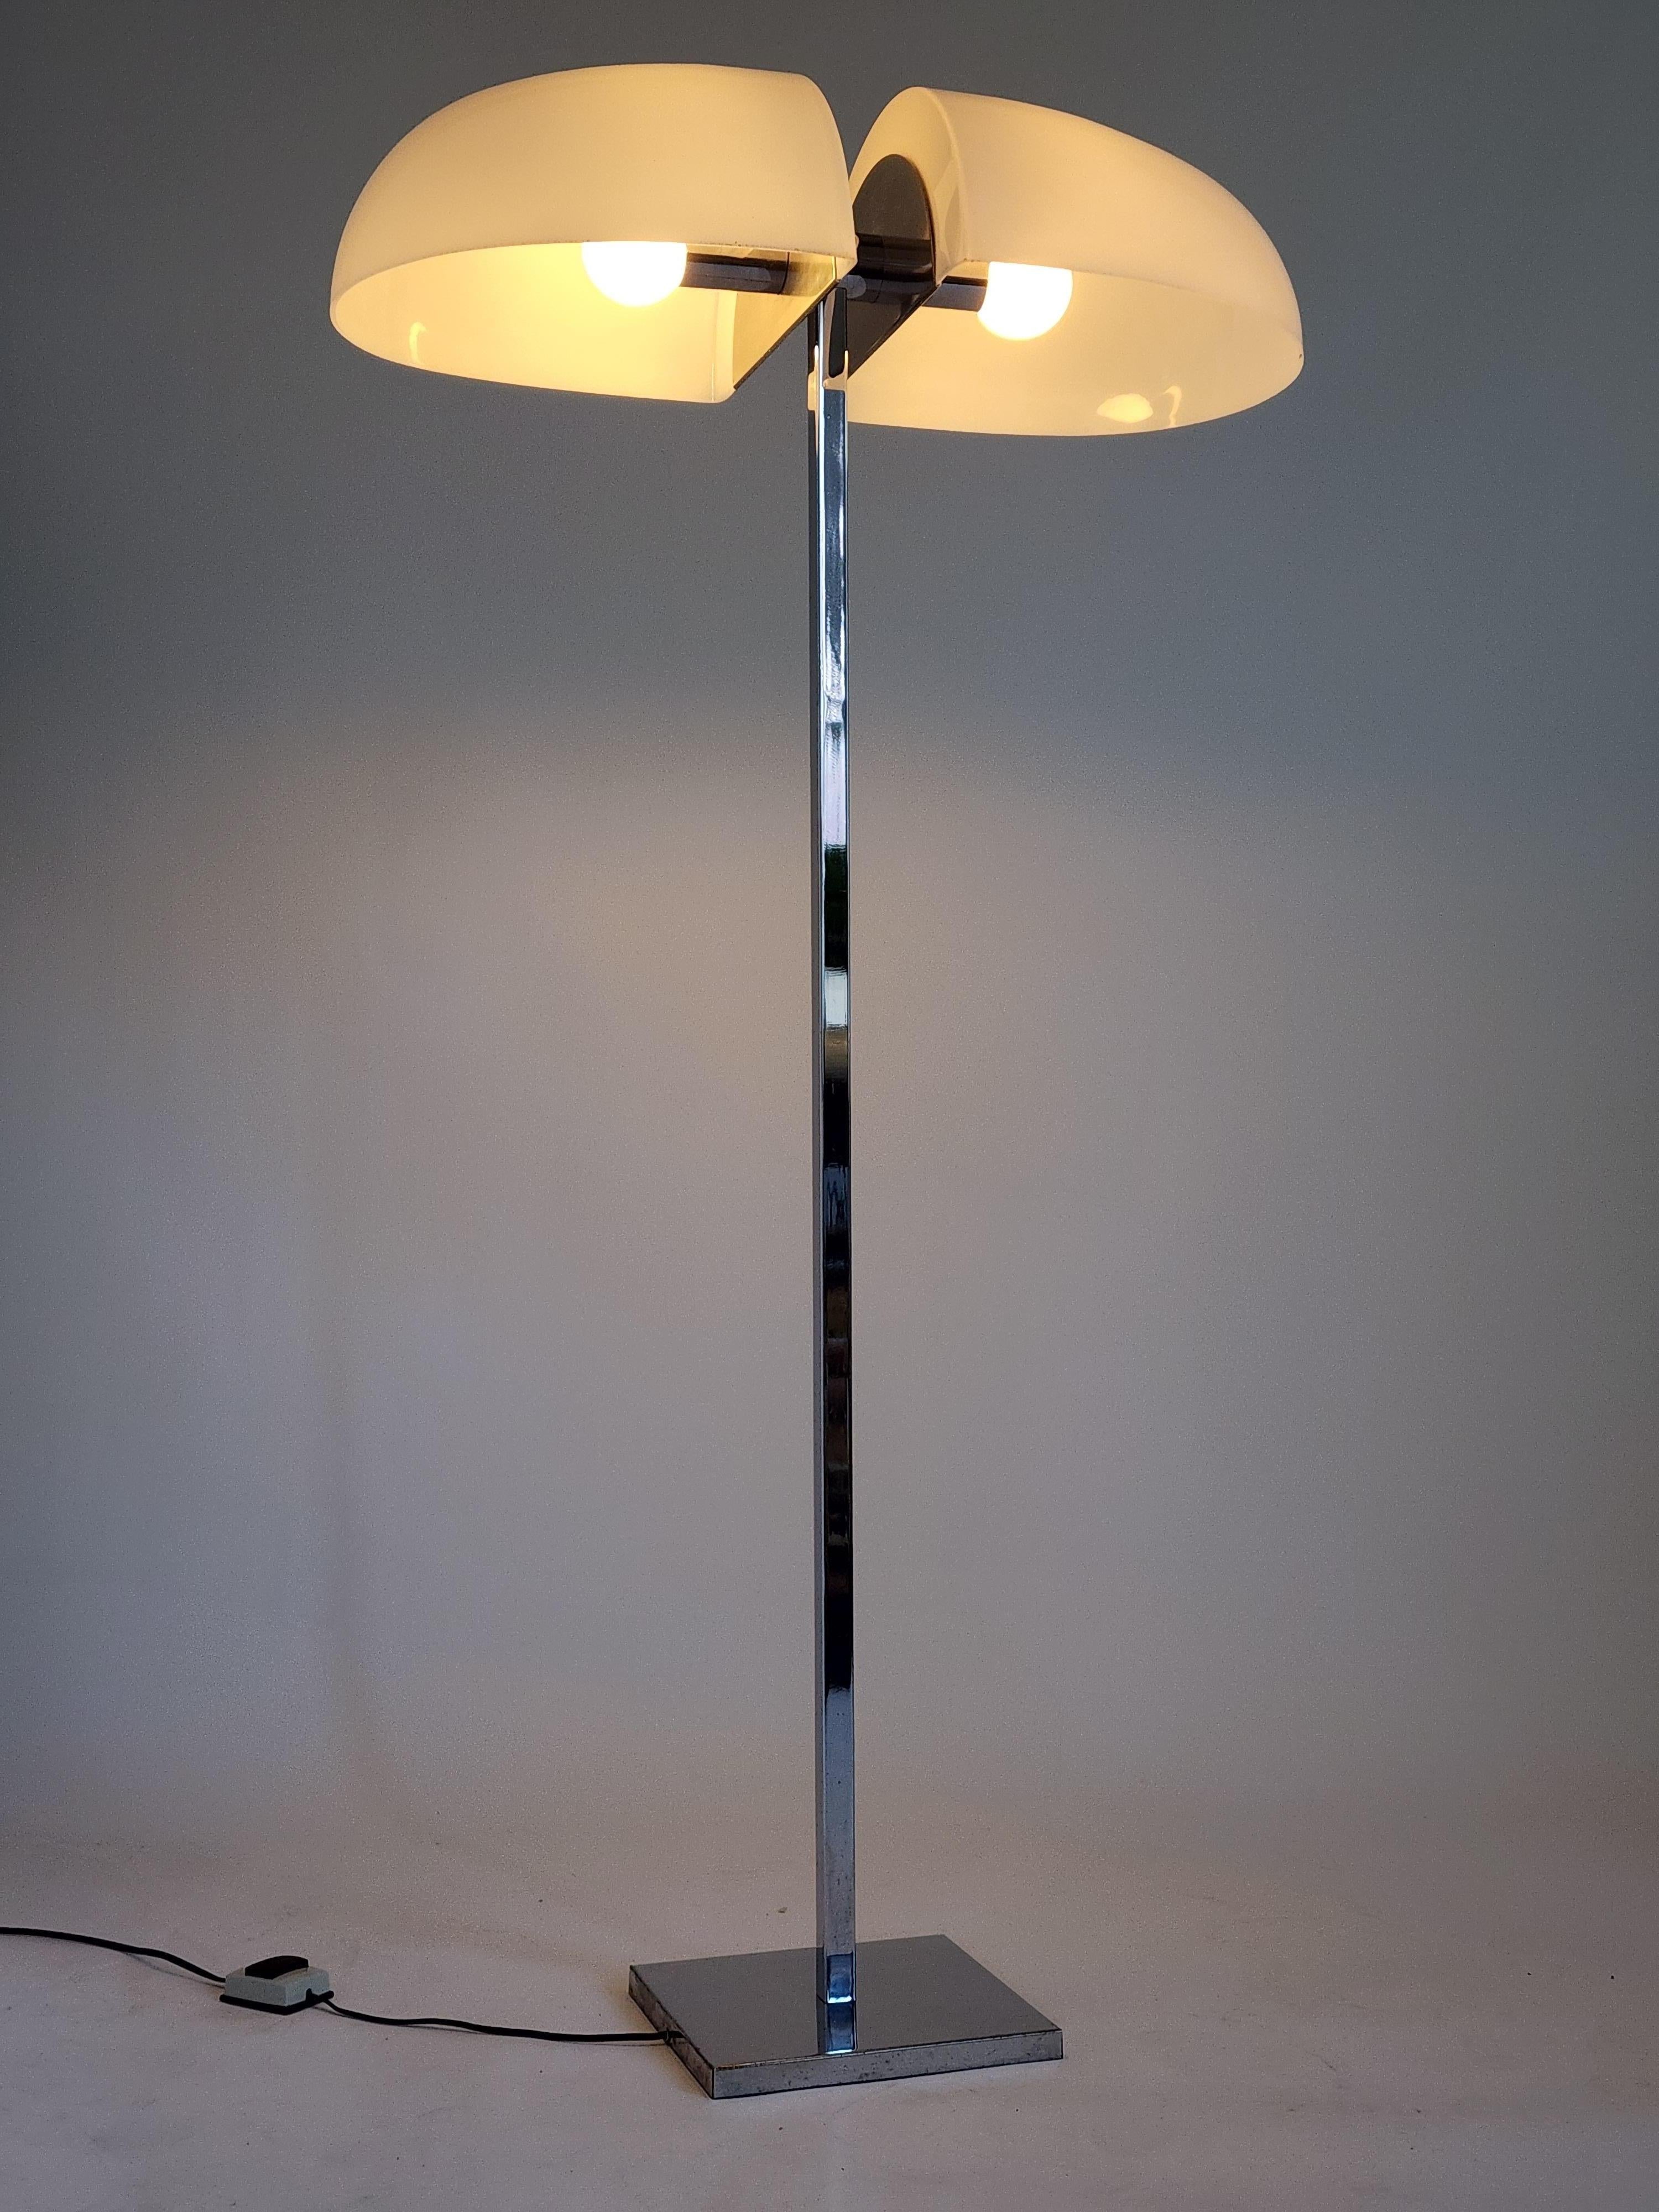 Rare floor lamp by Sergio Asti.

Large slot vented acrylic shade sitting on a chrome structure. 

Each shade measure 13.50 in. long by 7.5 in. high. by 15.25 deep. 

2 E26 Edison size ceramic socket rated at 40 watt each. 

Original foot